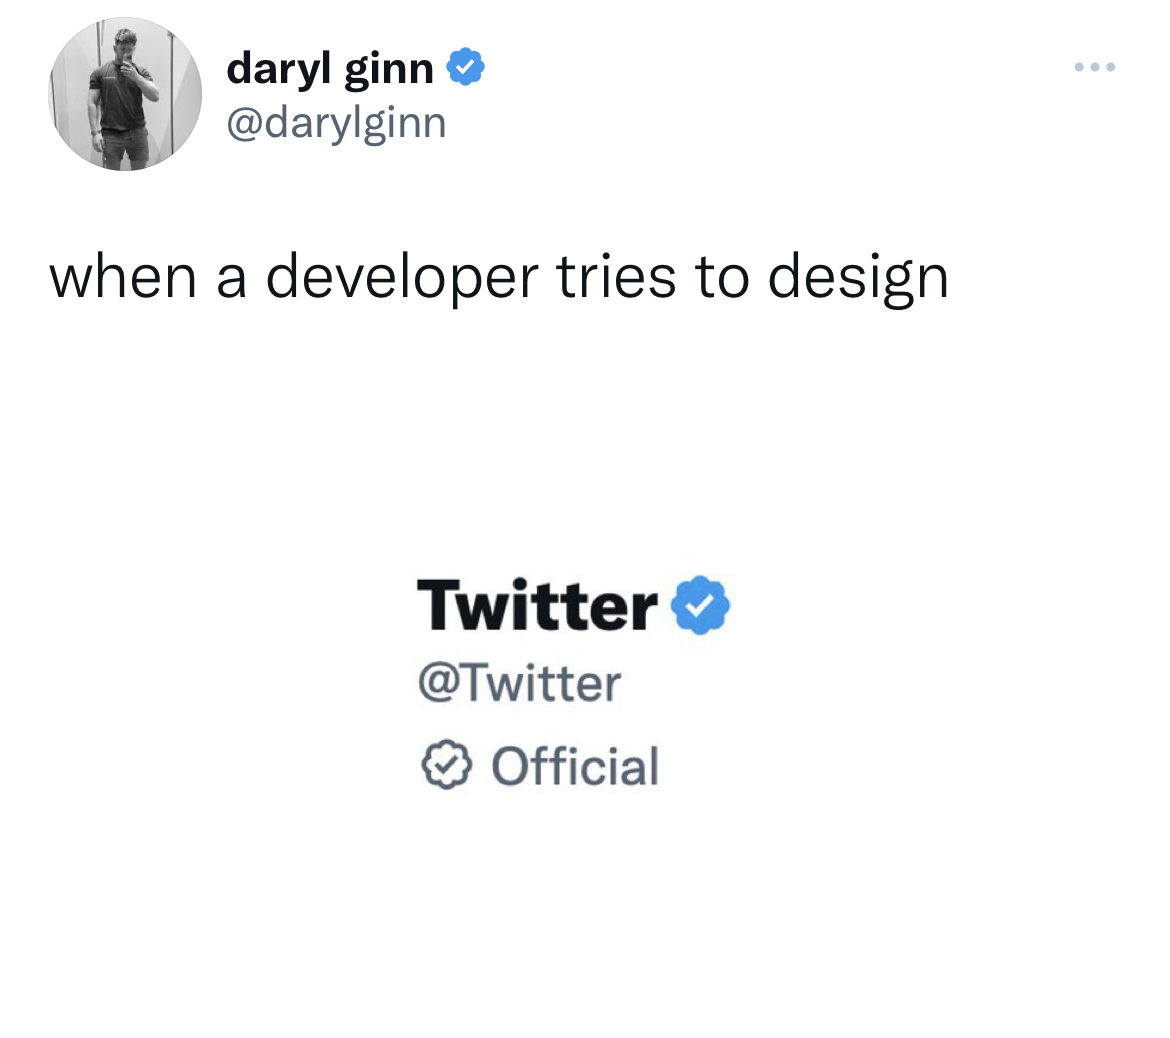 angle - daryl ginn when a developer tries to design Twitter Official